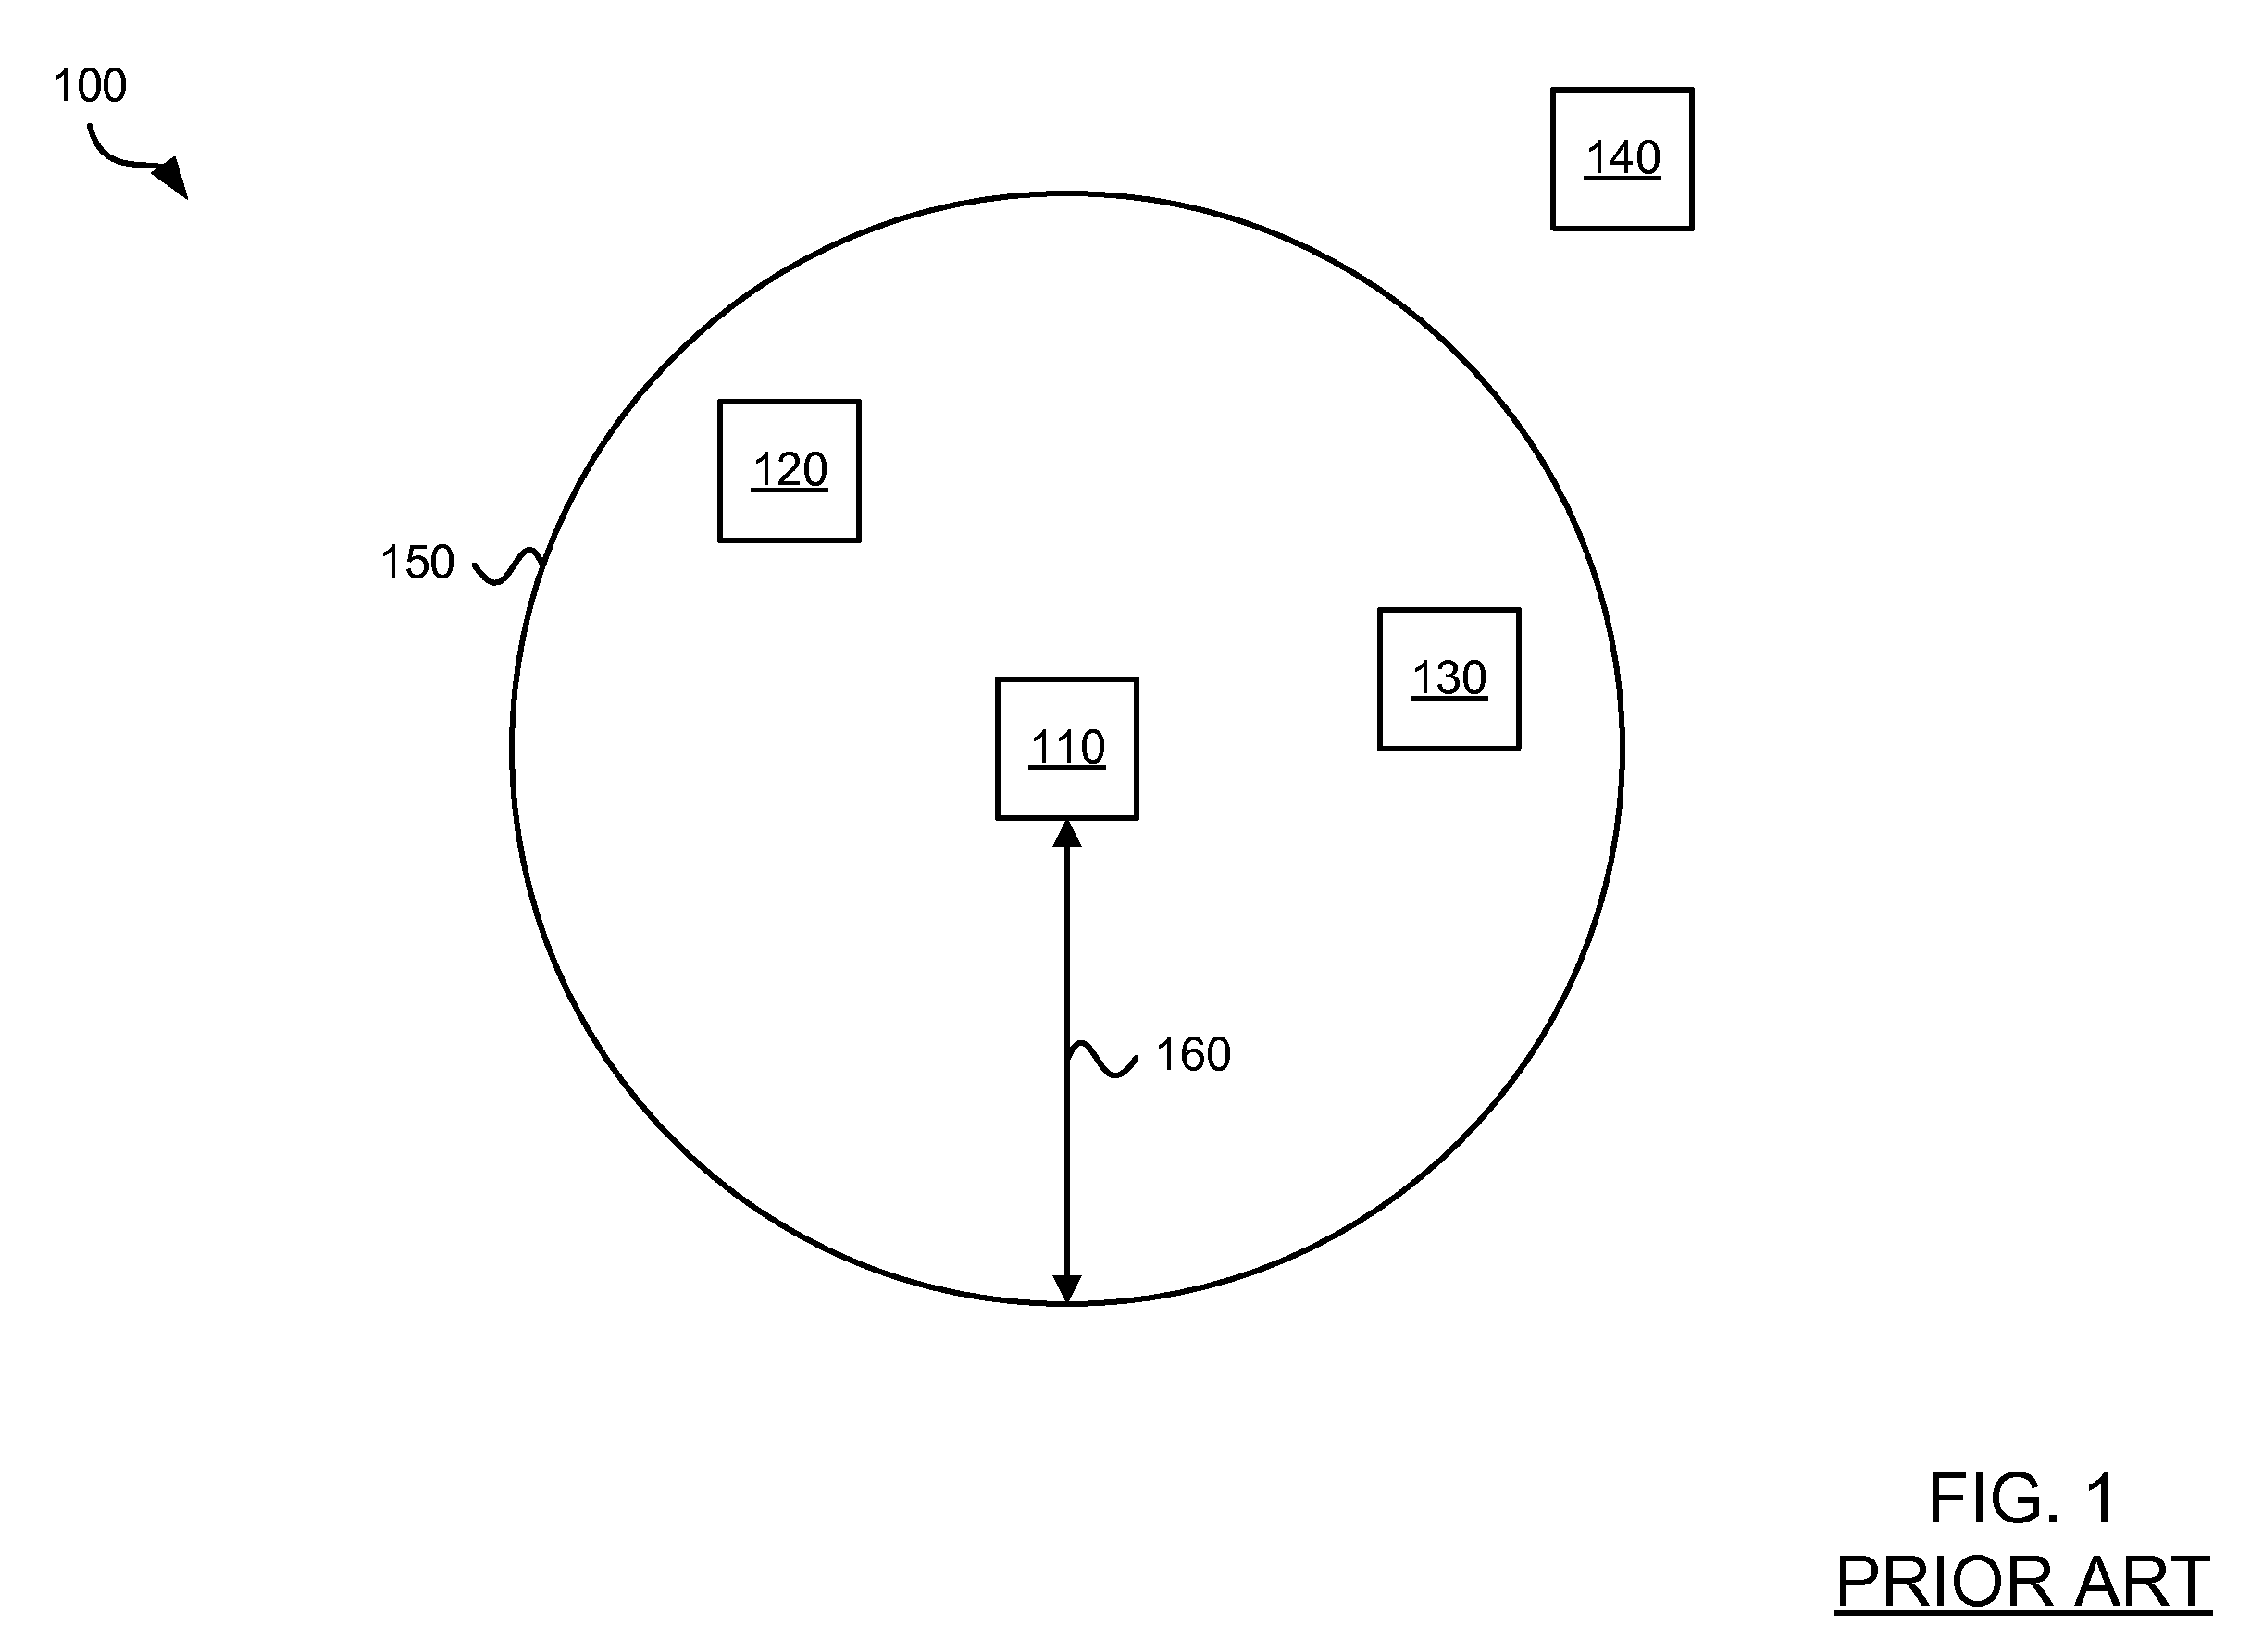 Coverage Enhancement Using Dynamic Antennas and Virtual Access Points